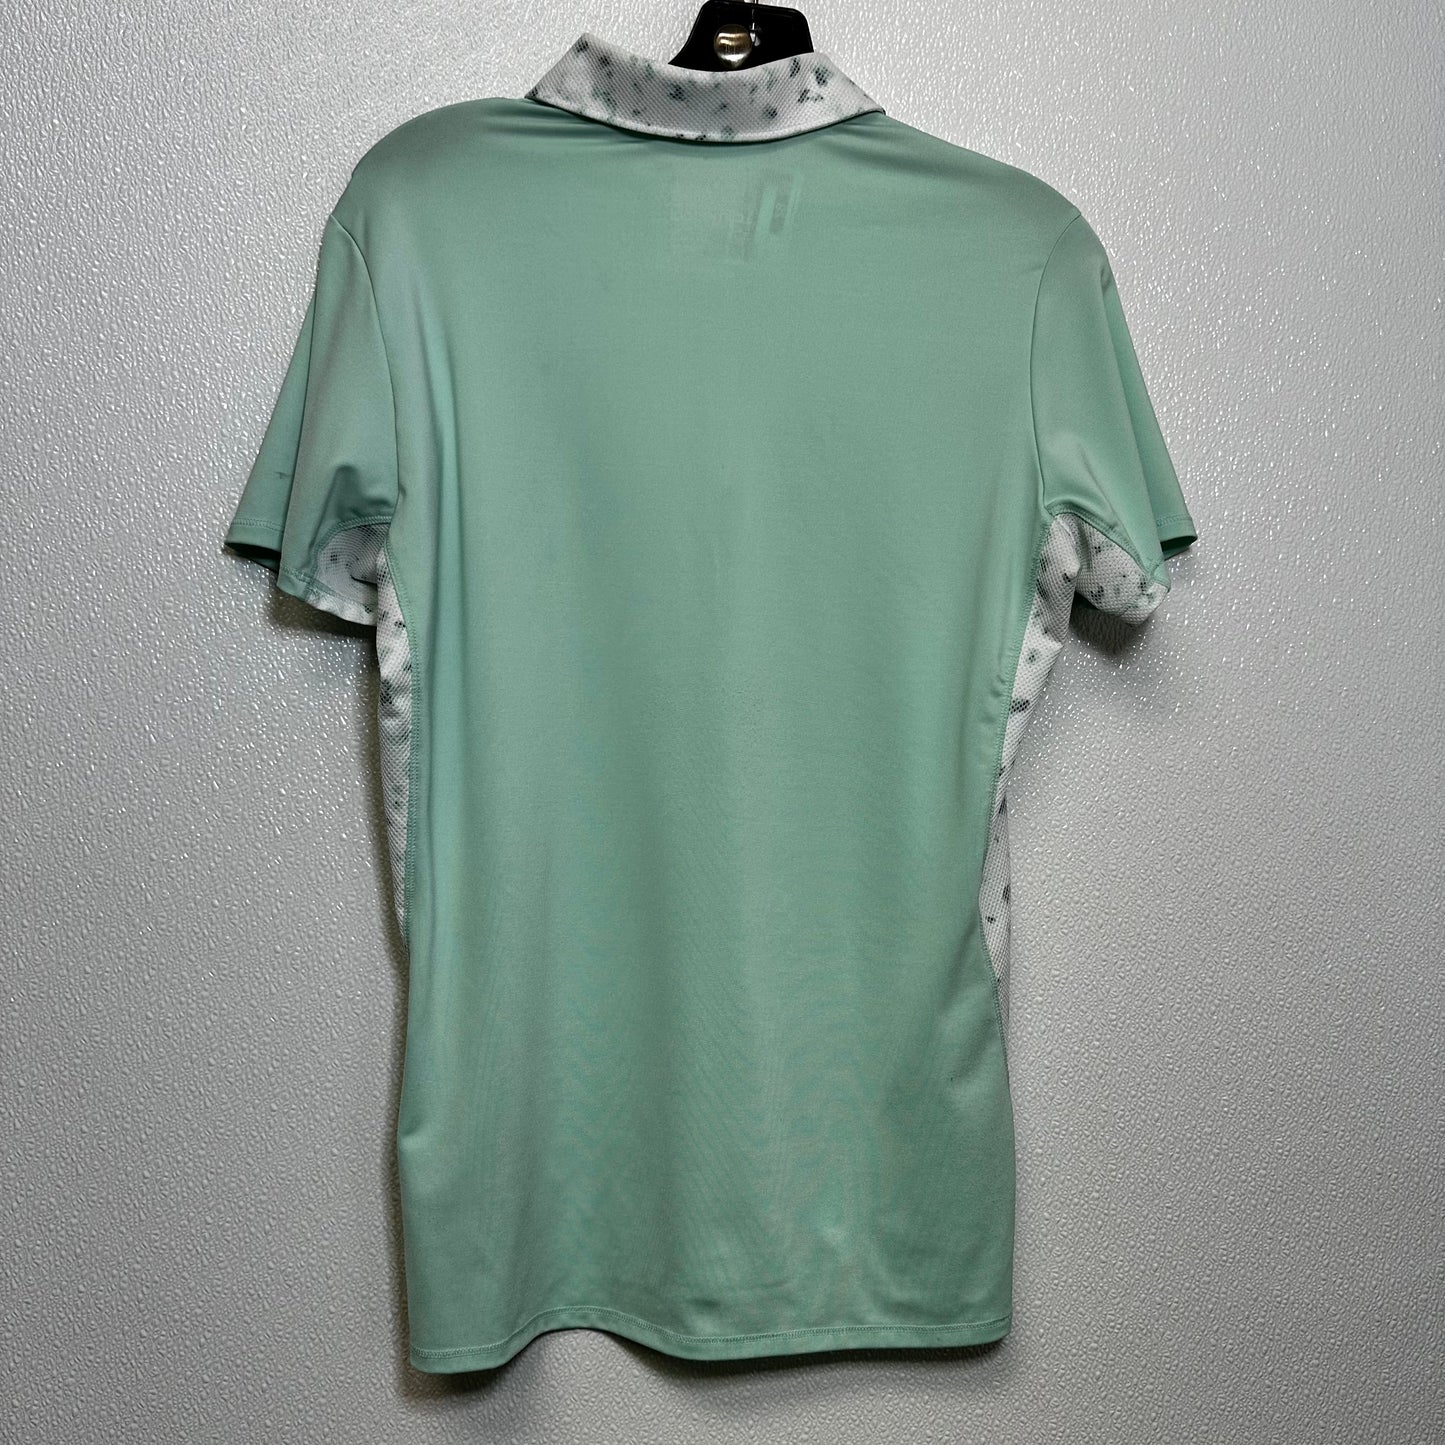 Mint Top Short Sleeve Climate Zone, Size M